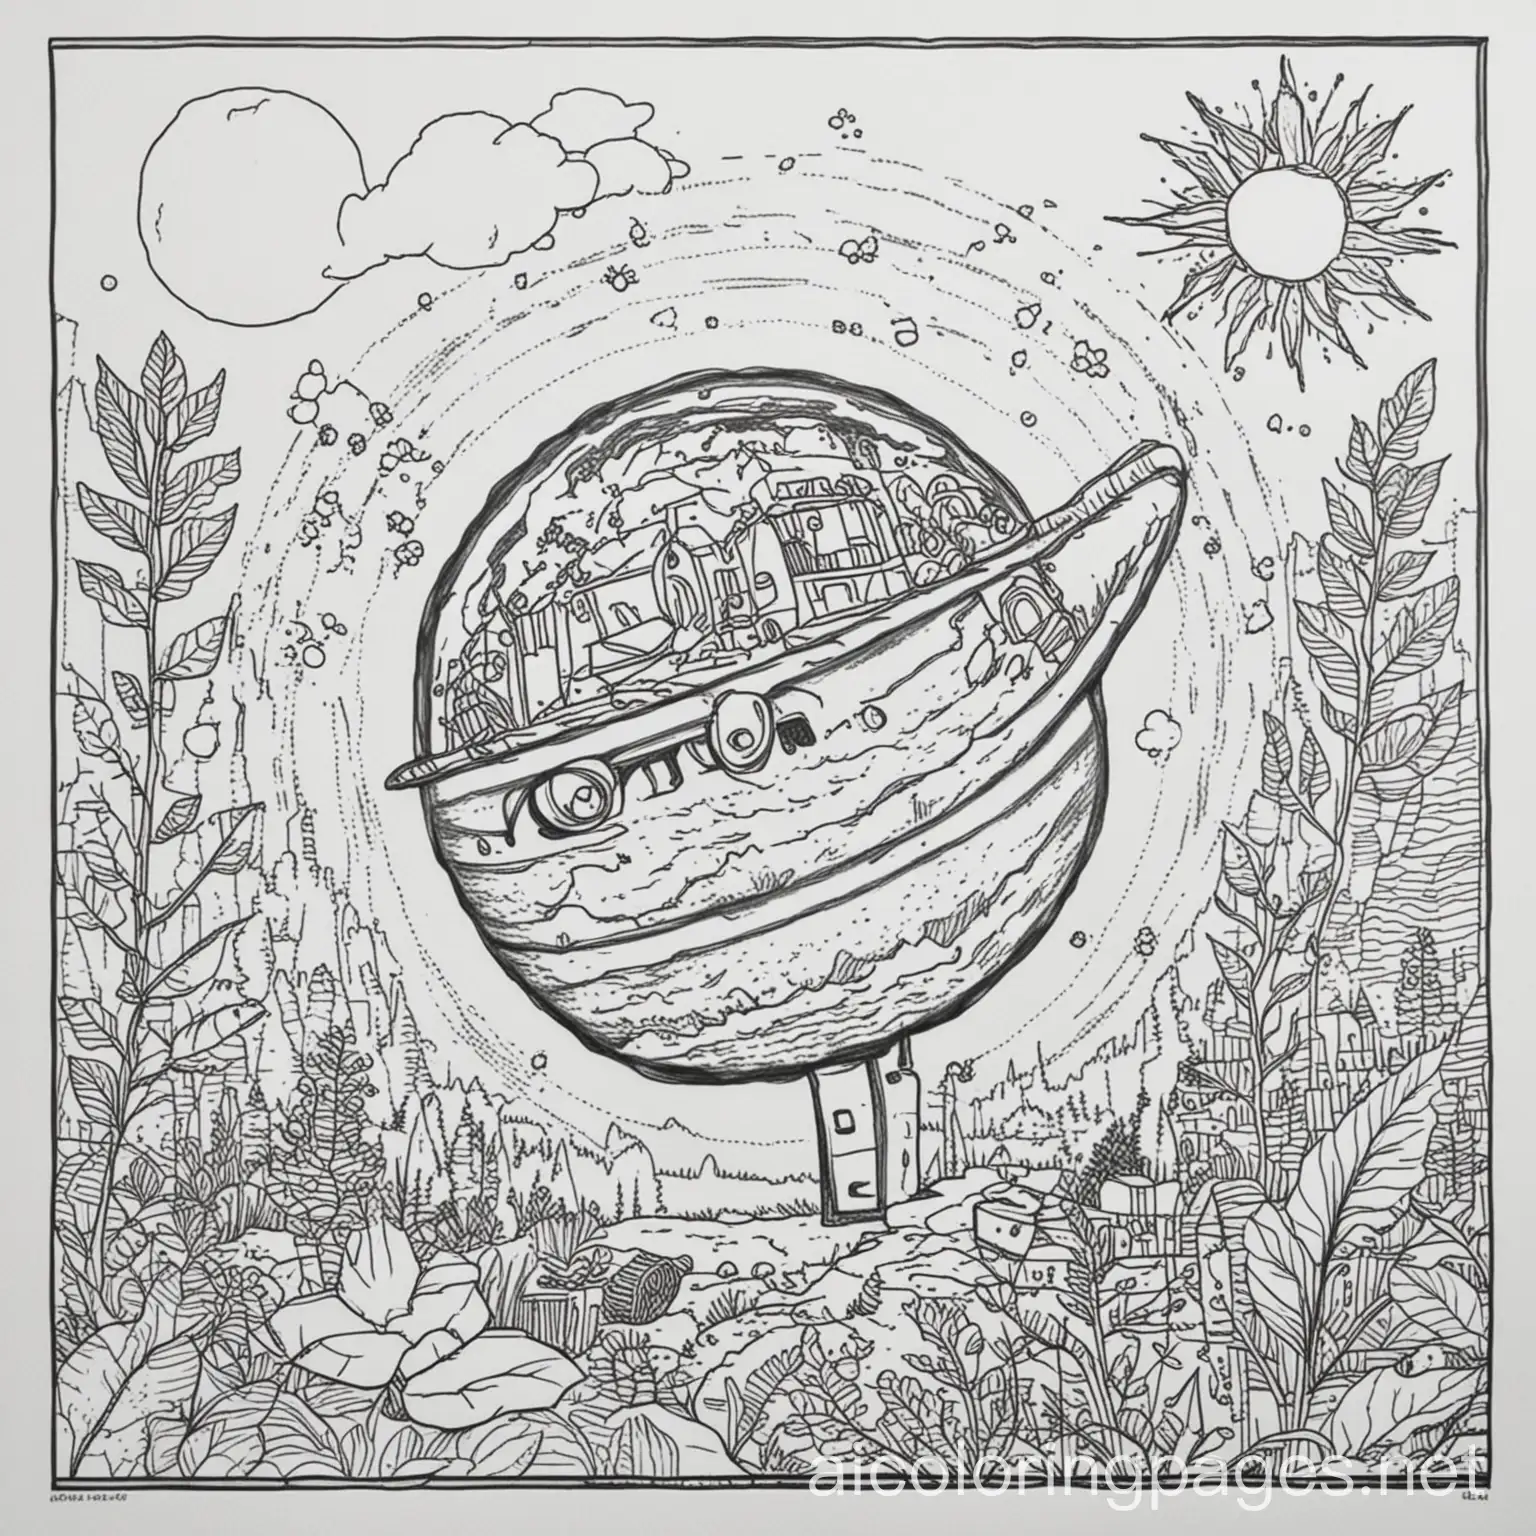 Nature, the environment, climate change, recycling, science, and stopping climate change.
, Coloring Page, black and white, line art, white background, Simplicity, Ample White Space. The background of the coloring page is plain white to make it easy for young children to color within the lines. The outlines of all the subjects are easy to distinguish, making it simple for kids to color without too much difficulty